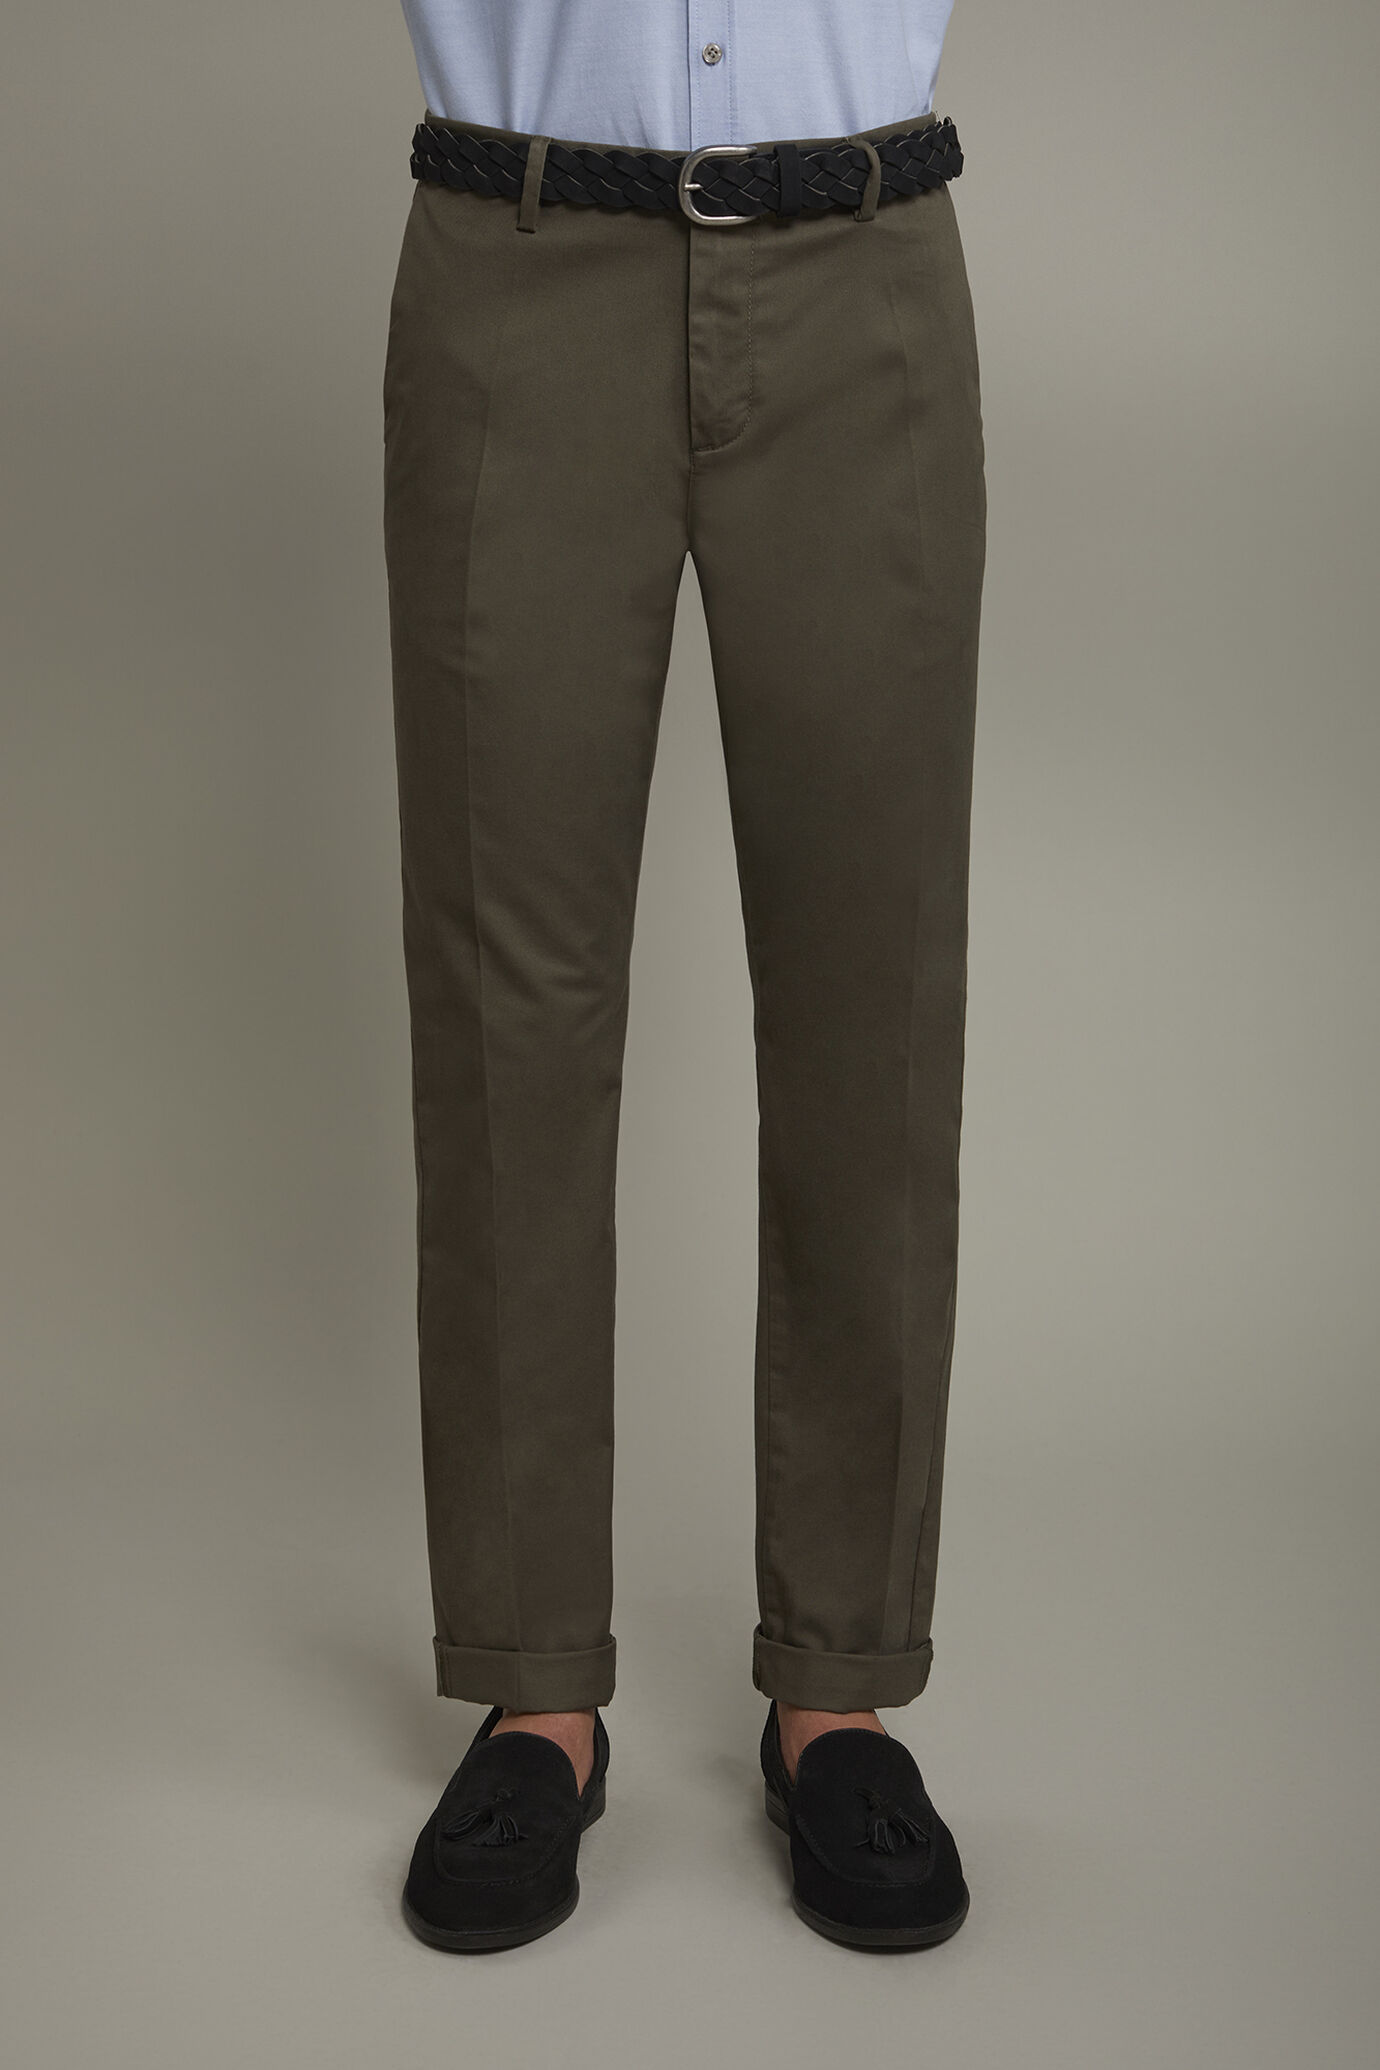 Men's chino trousers classic twill construction perfect fit image number 3